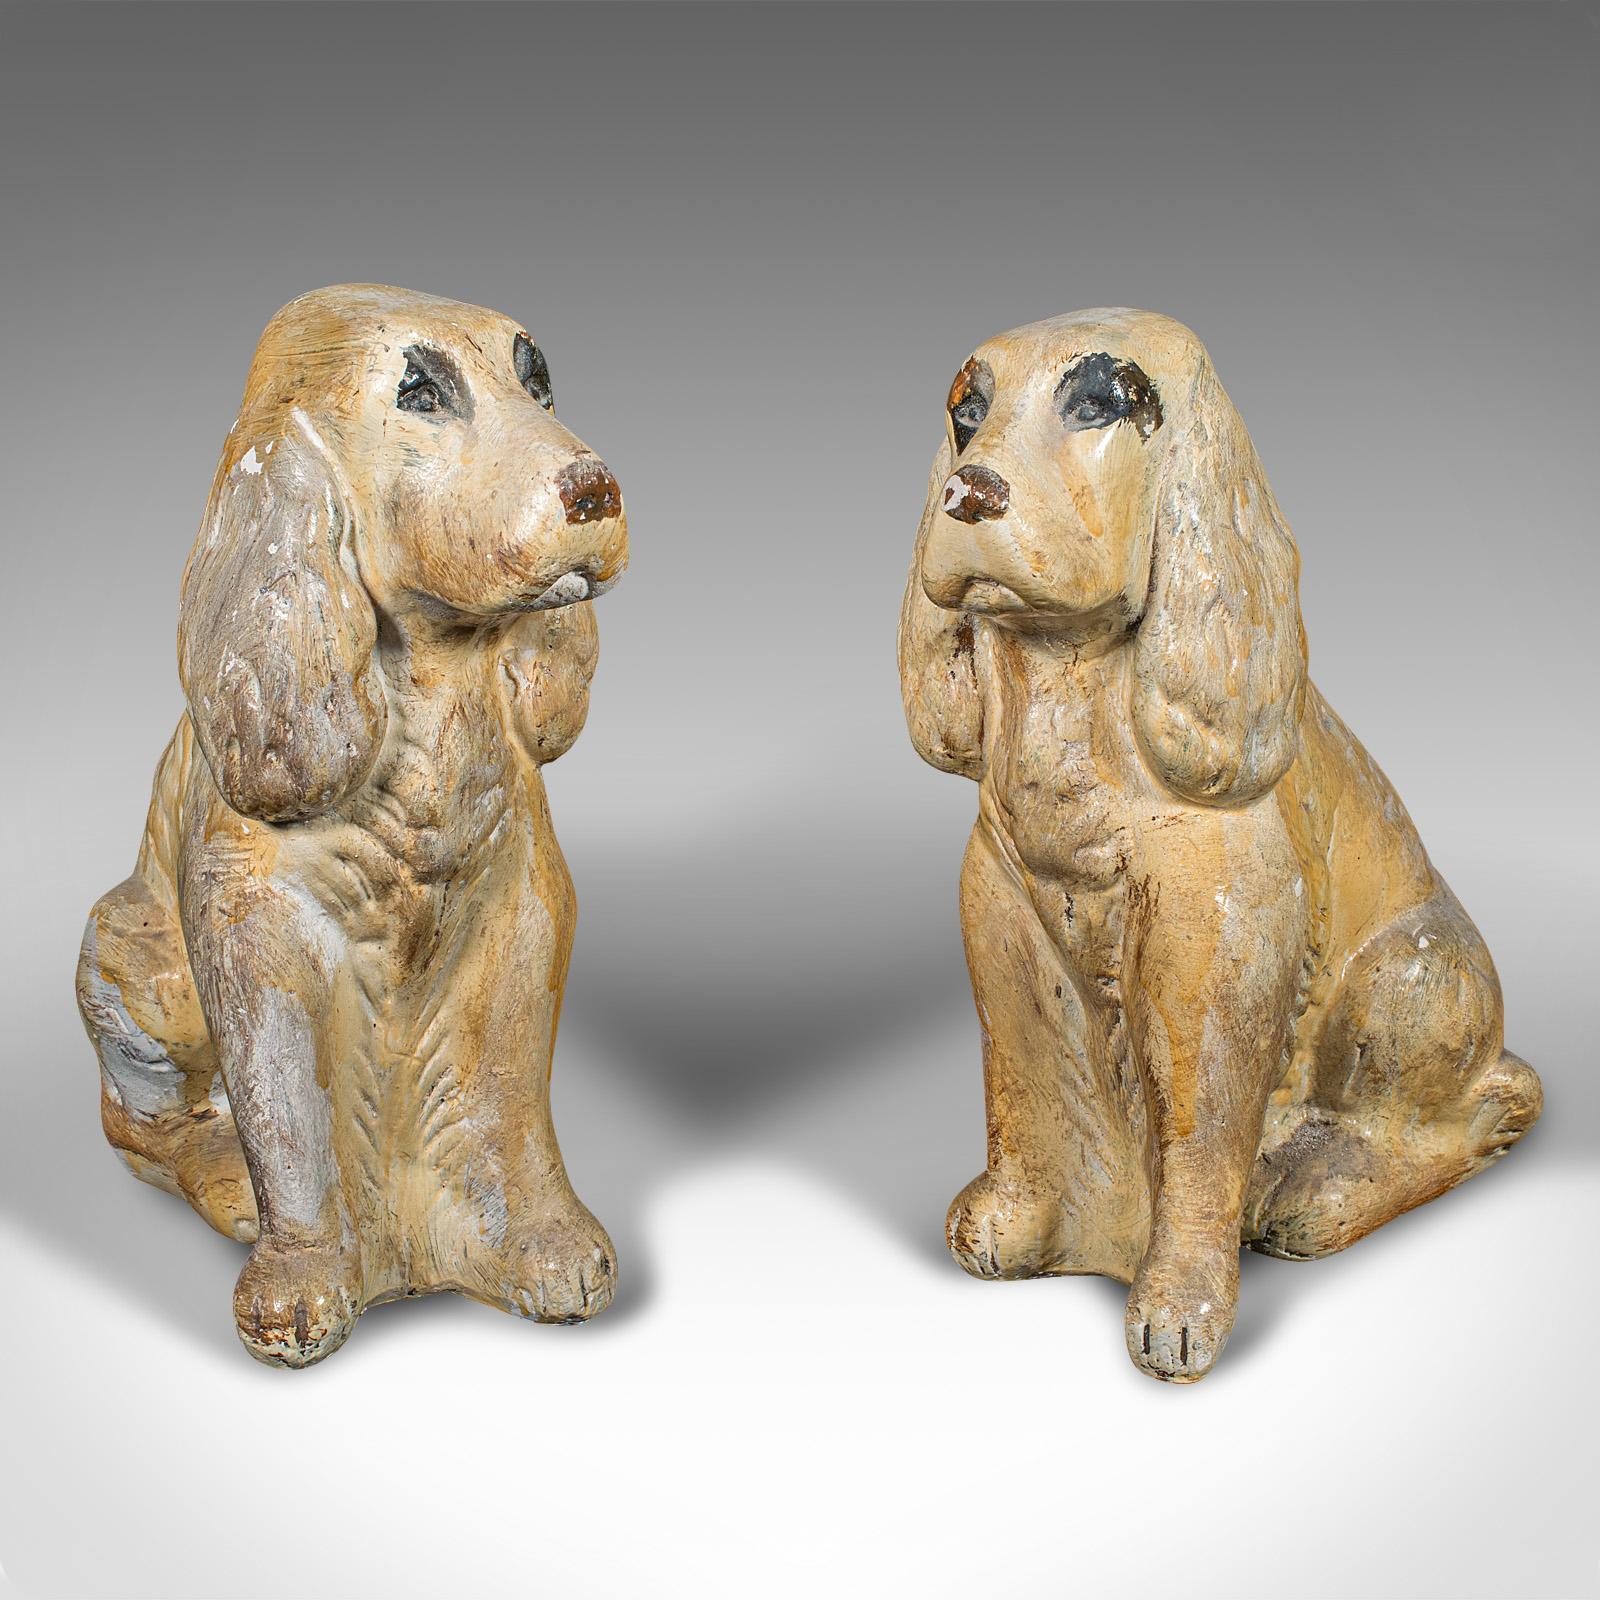 Pair Of Antique Cocker Spaniel Figures, English, Plaster, Doorstops, Edwardian In Good Condition For Sale In Hele, Devon, GB